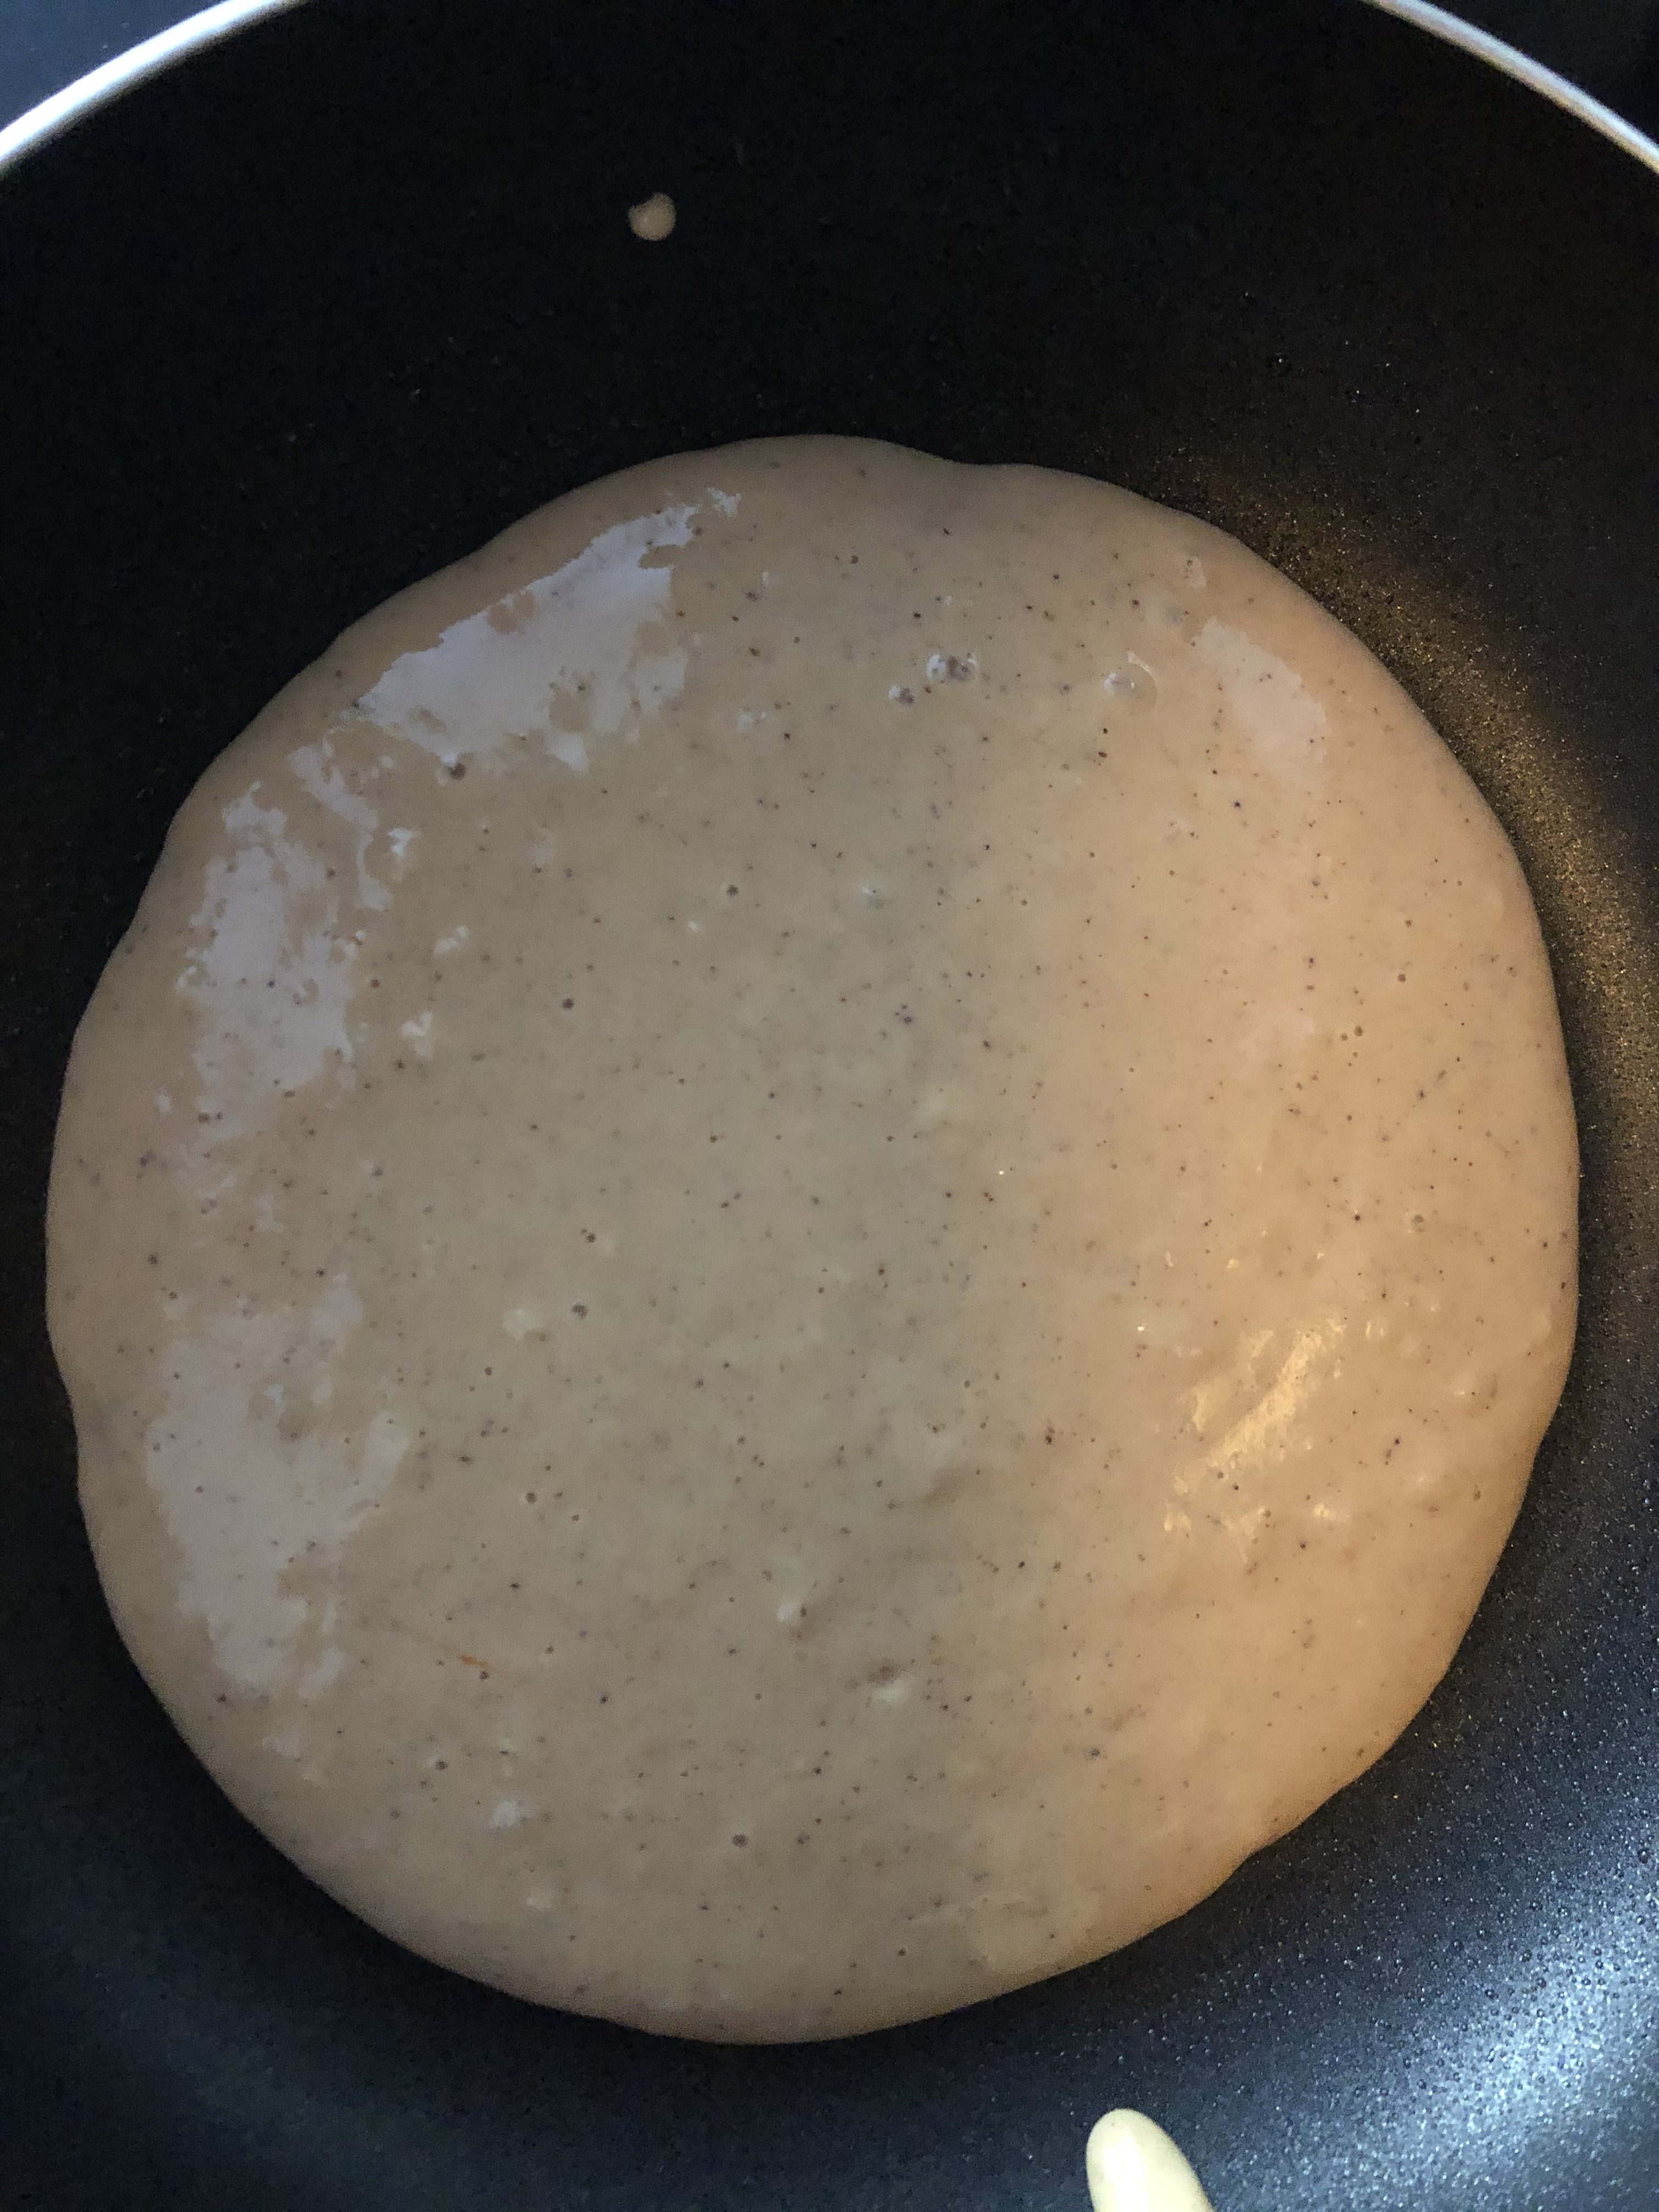 Pour about ¼ cup batter into pan to desired size of pancake.